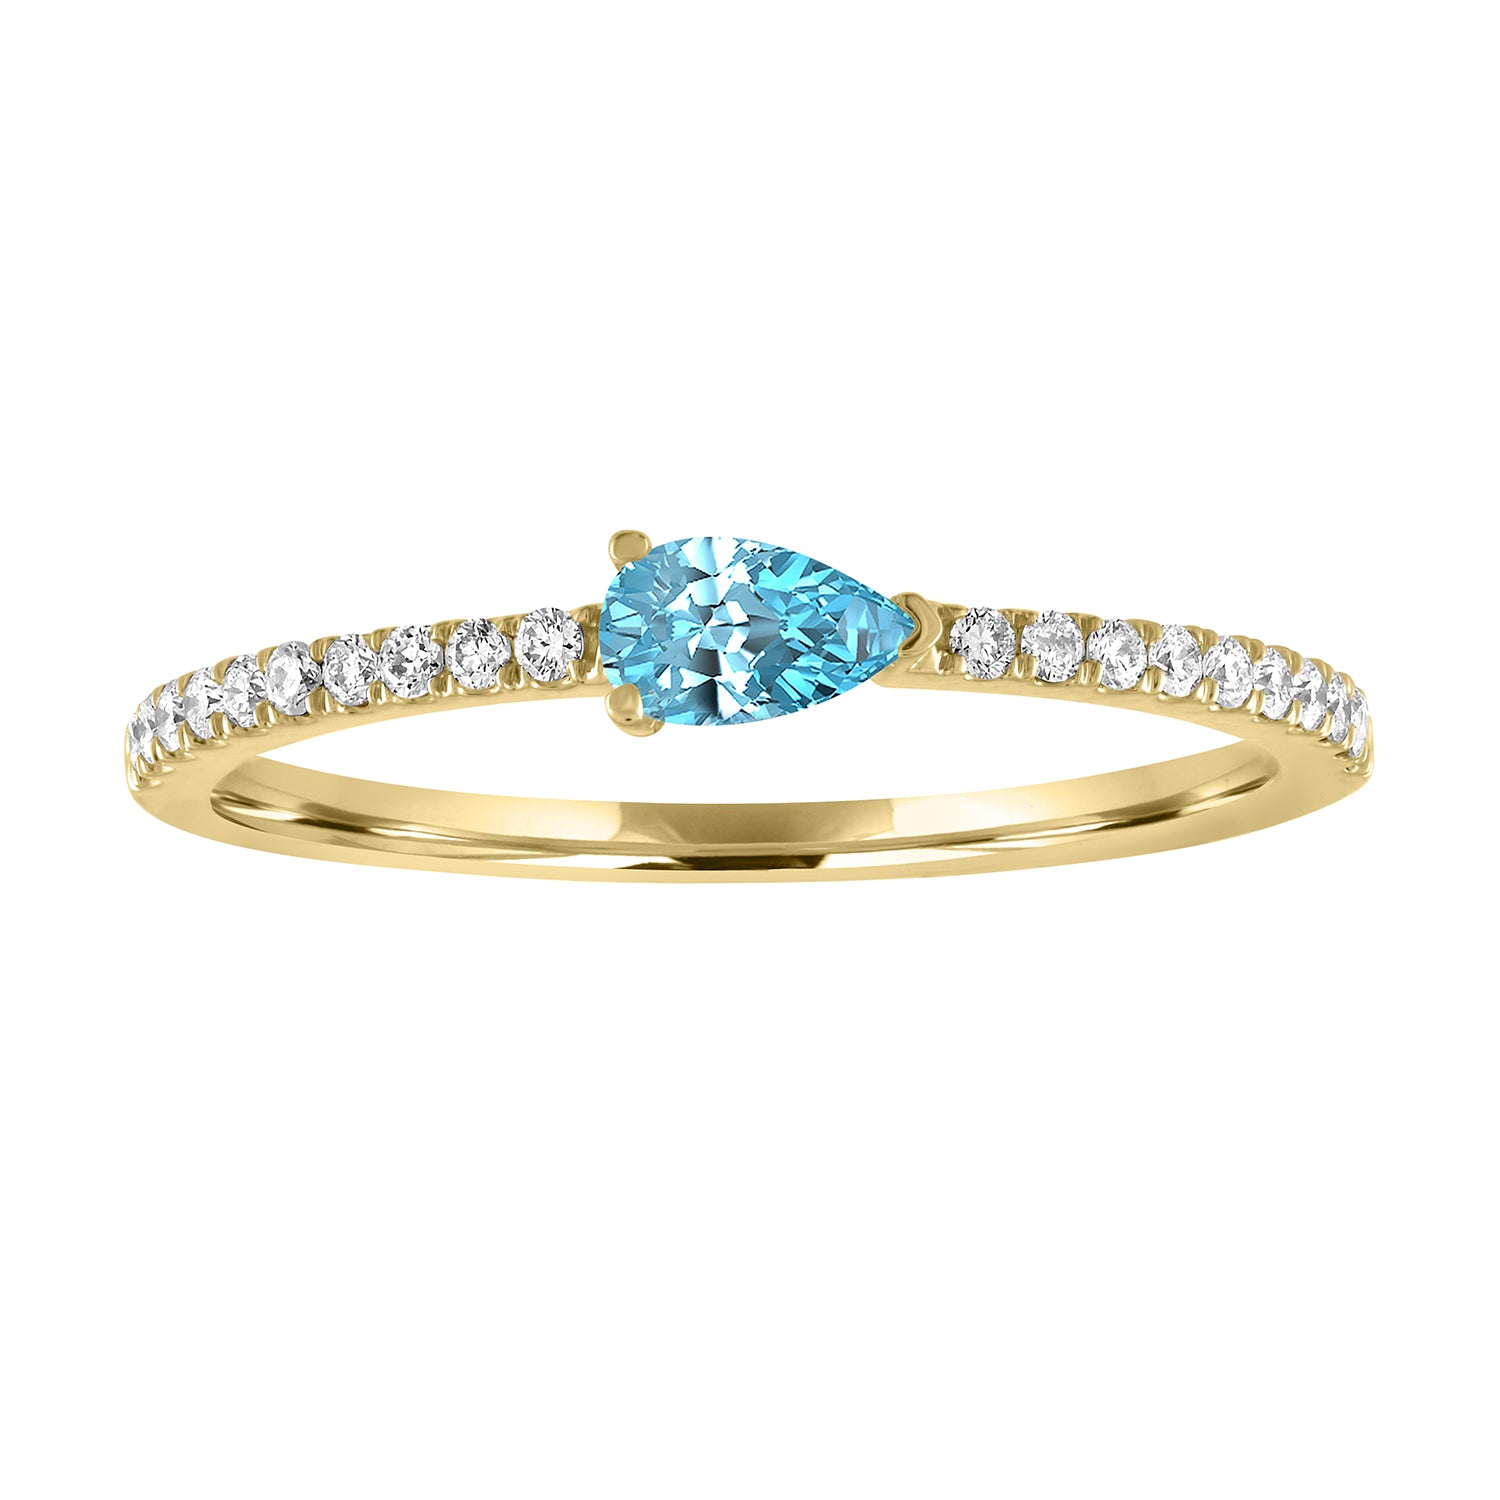 Yellow gold skinny band with a pear shaped aquamarine in the center and round diamonds on the shank. 